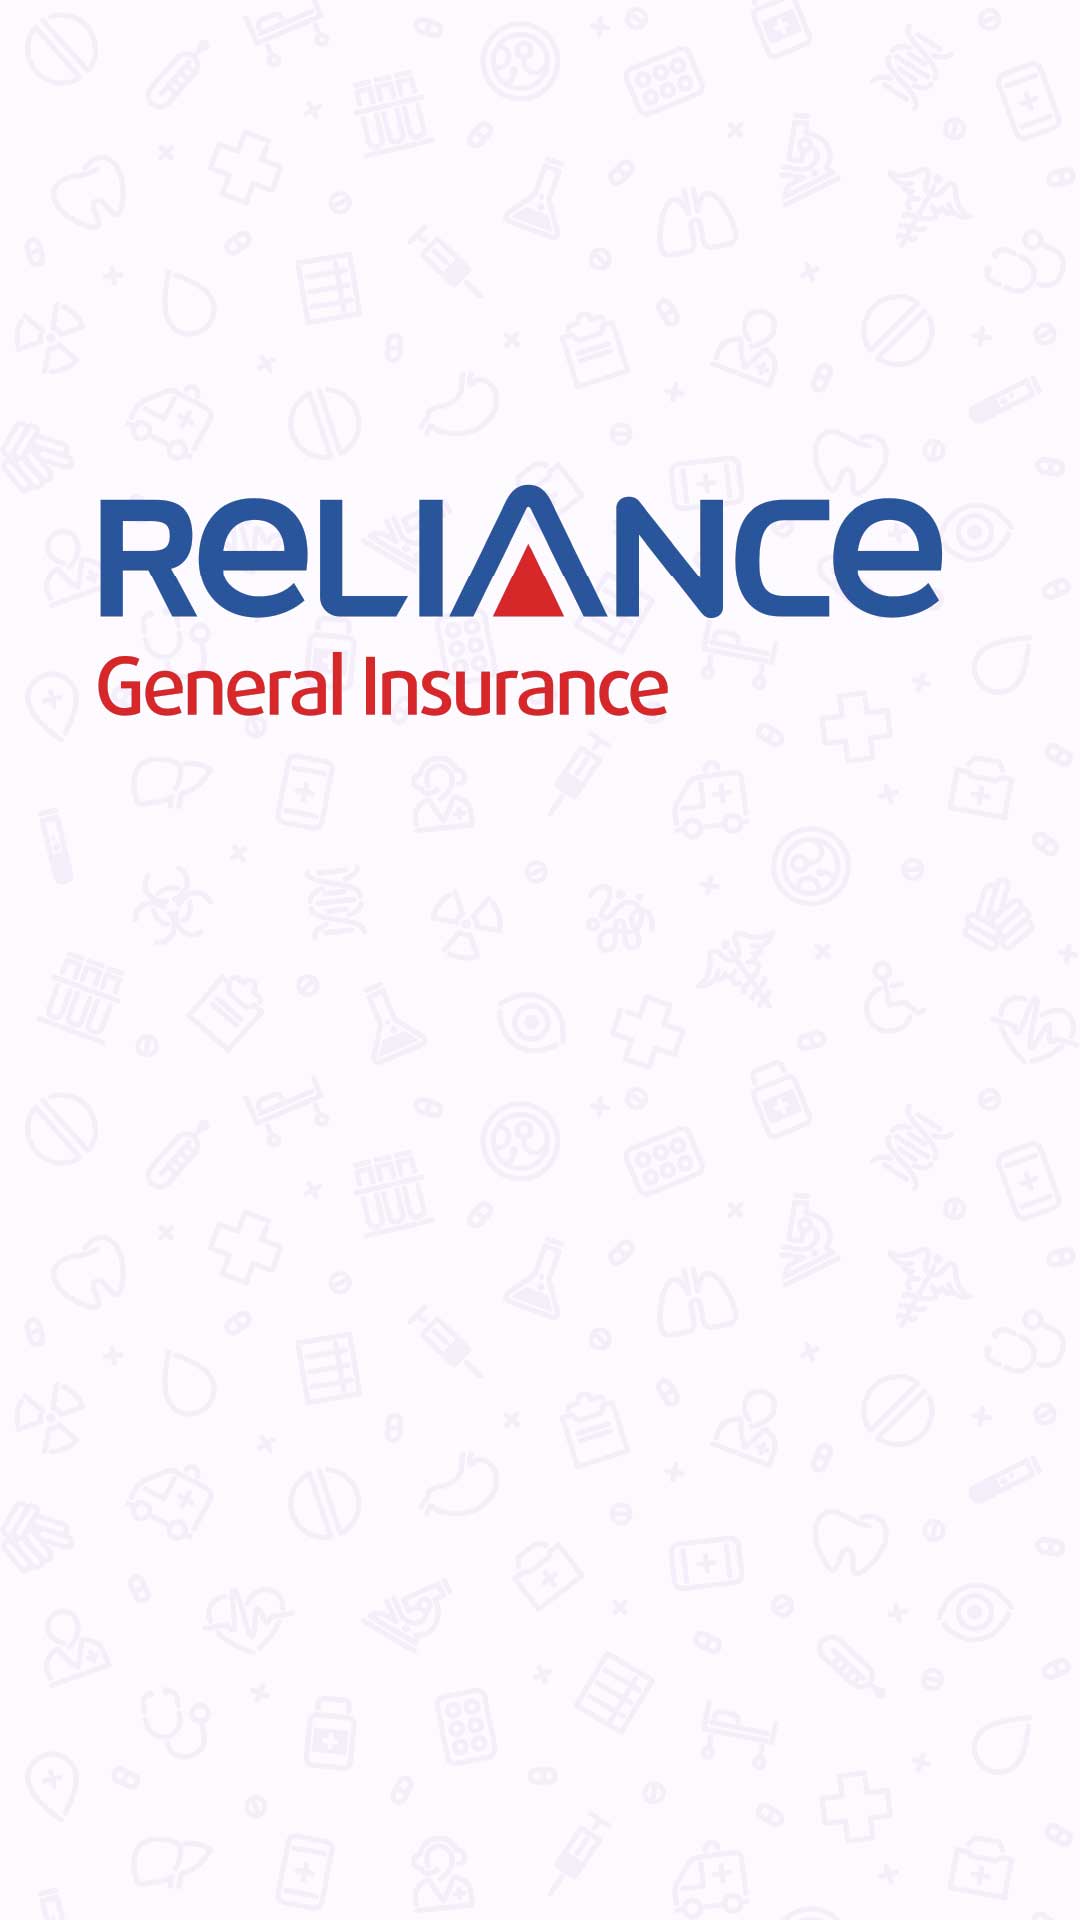 Reliance General Insurance launches new healthcare plan